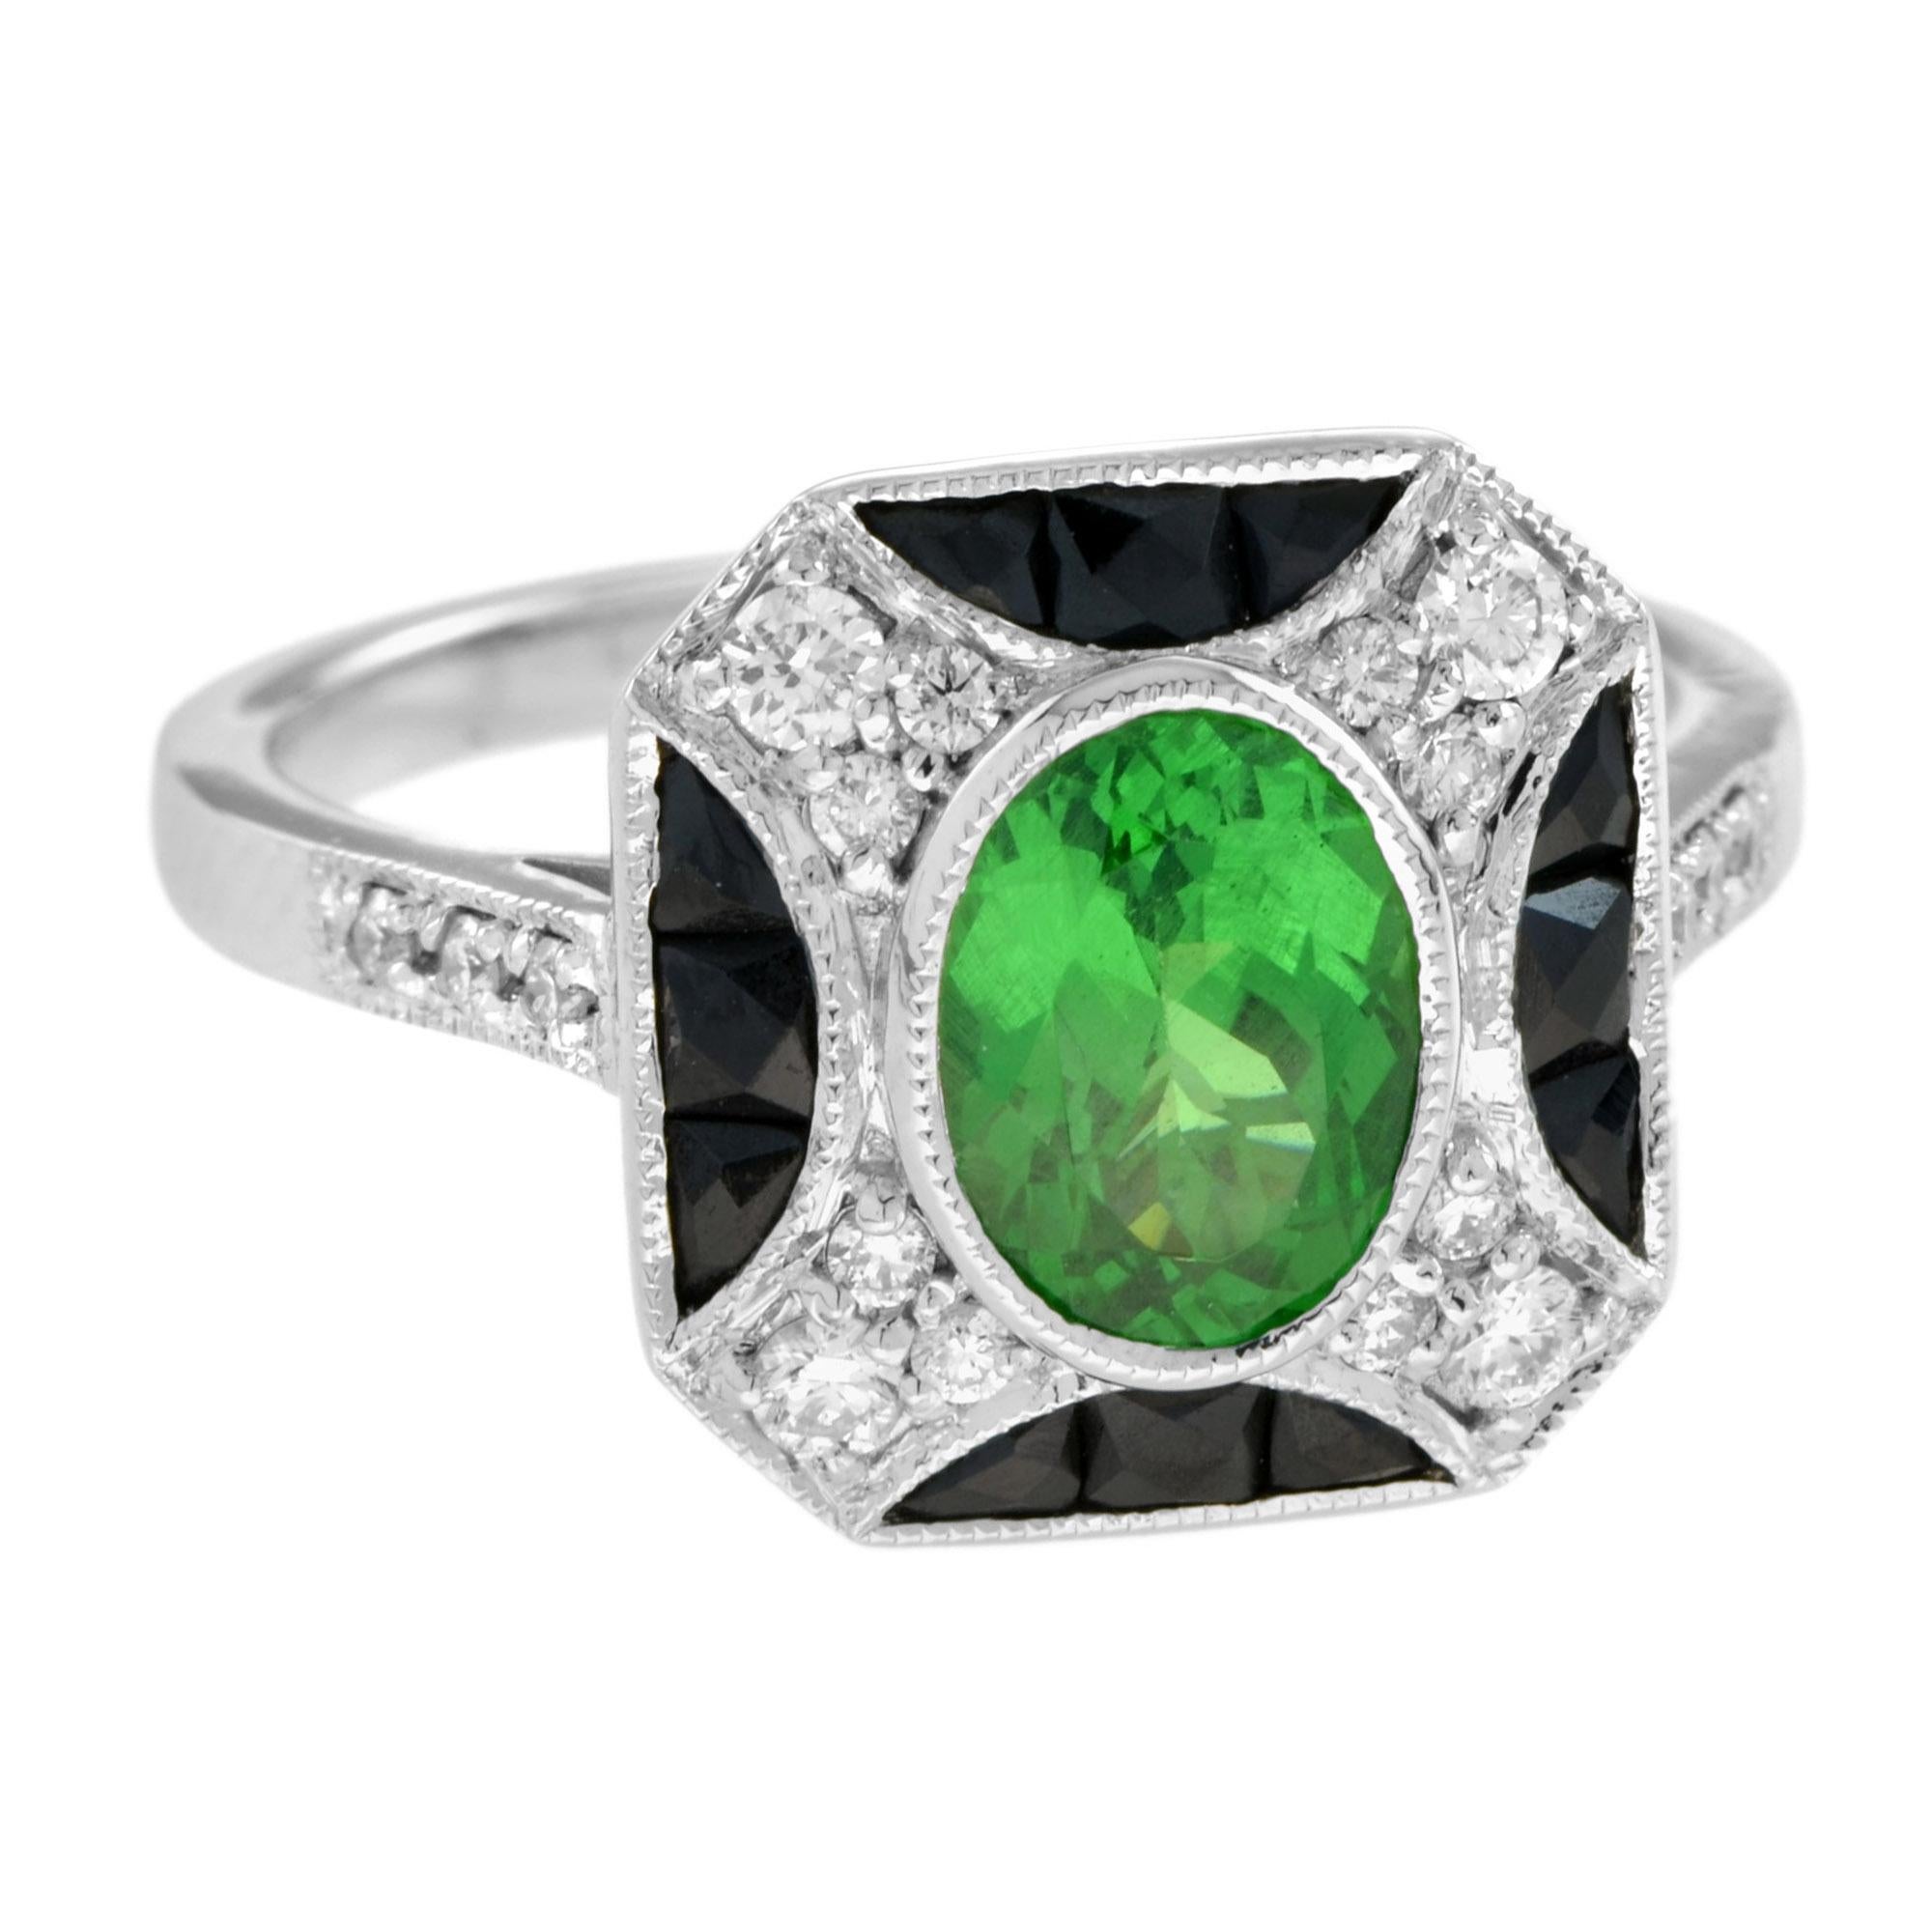 An impressive antique Art Deco inspired 1.5 carat oval tsavorite with diamond and onyx accent. The ring is crafted in 14k white gold and is currently a finger size 7. Low set, comfortable and unique this ring is outstanding. 

Ring